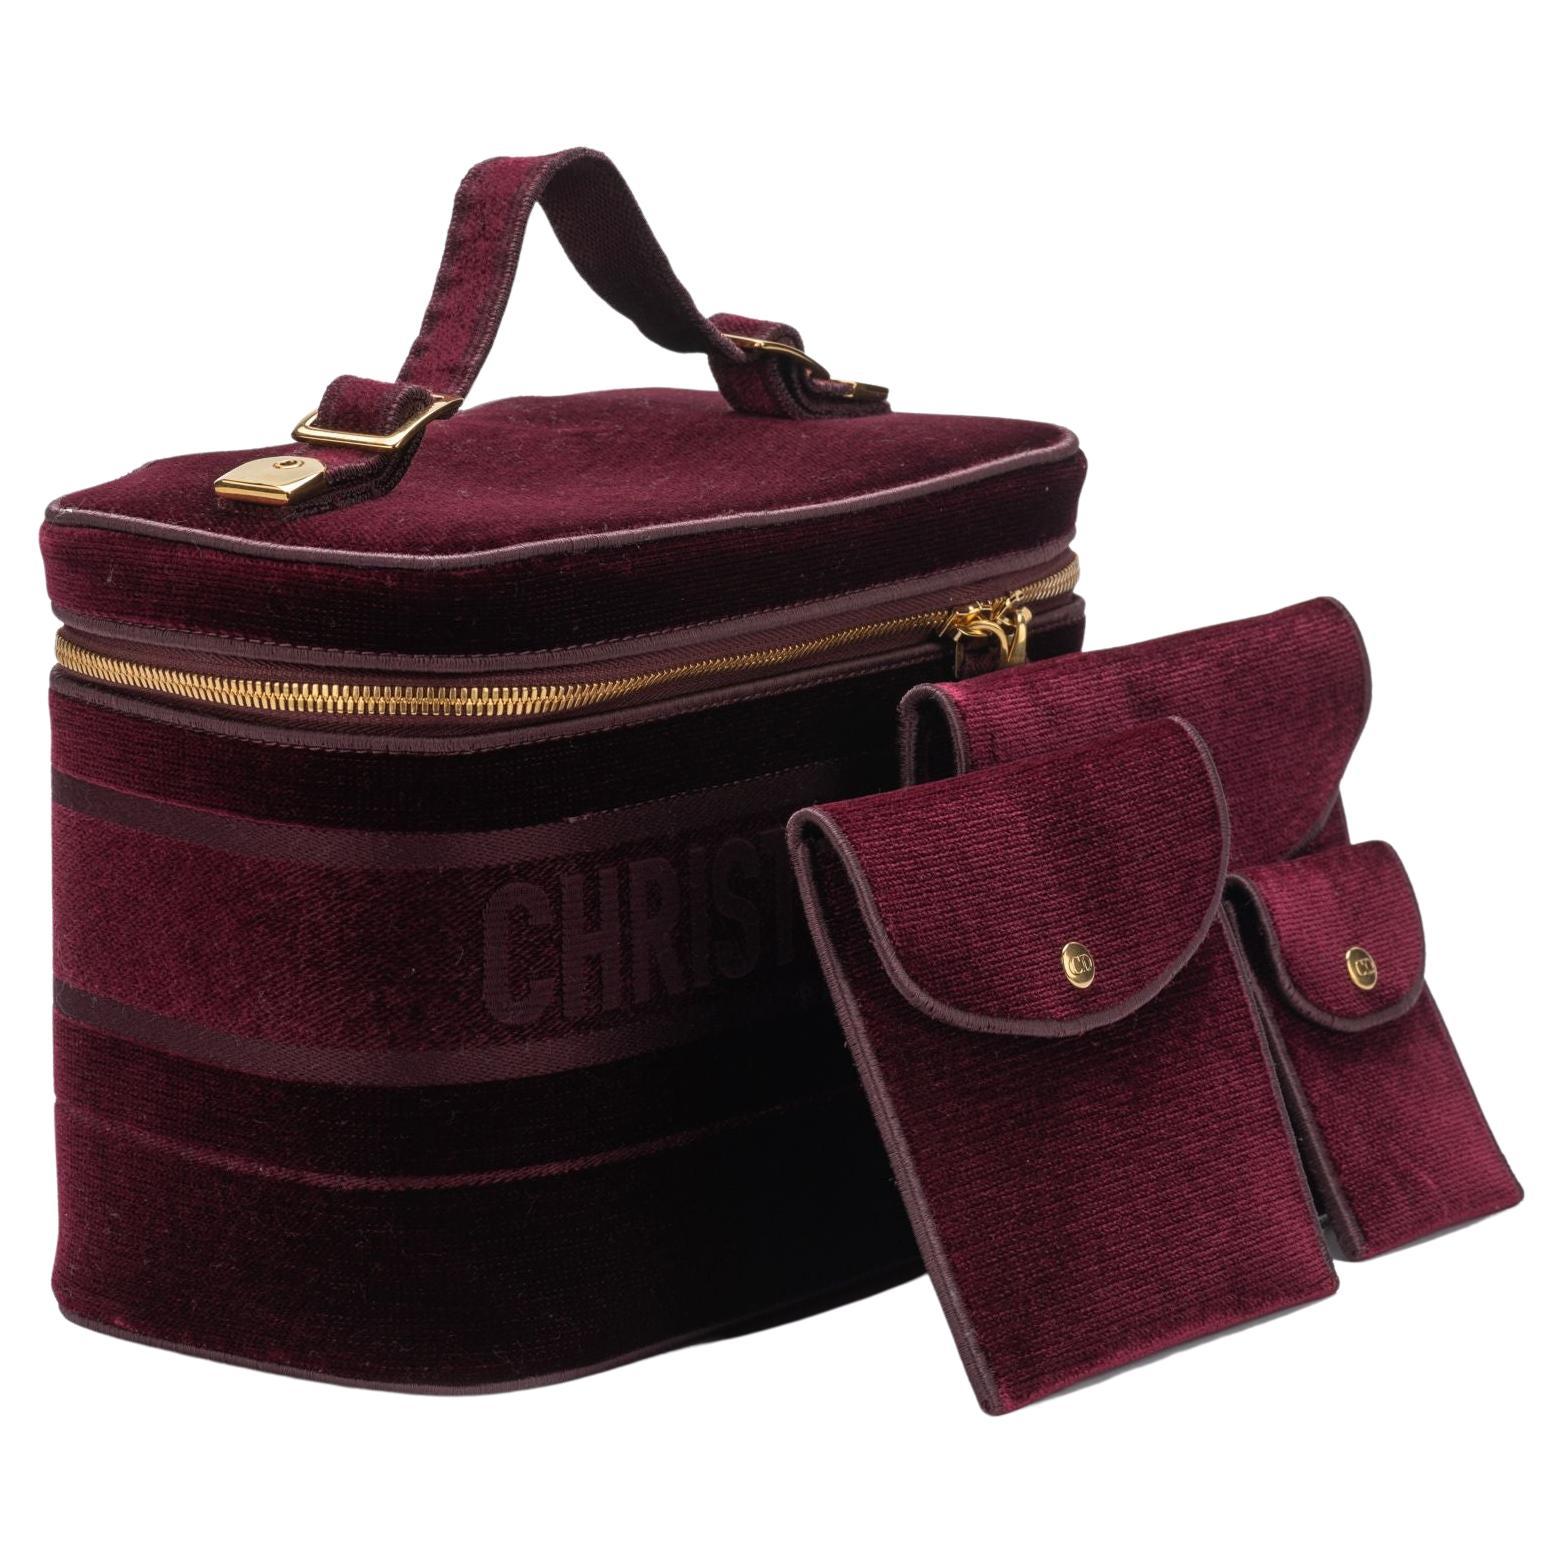 Dior brand new large travel bag in deep burgundy velvet with zipper and golden details. Can also be used for cosmetic items or your jewelry! The different pockets measure 6.75x5.25”; 5x5” and 2.75x3.5. 
Comes with original dustcover and tag.